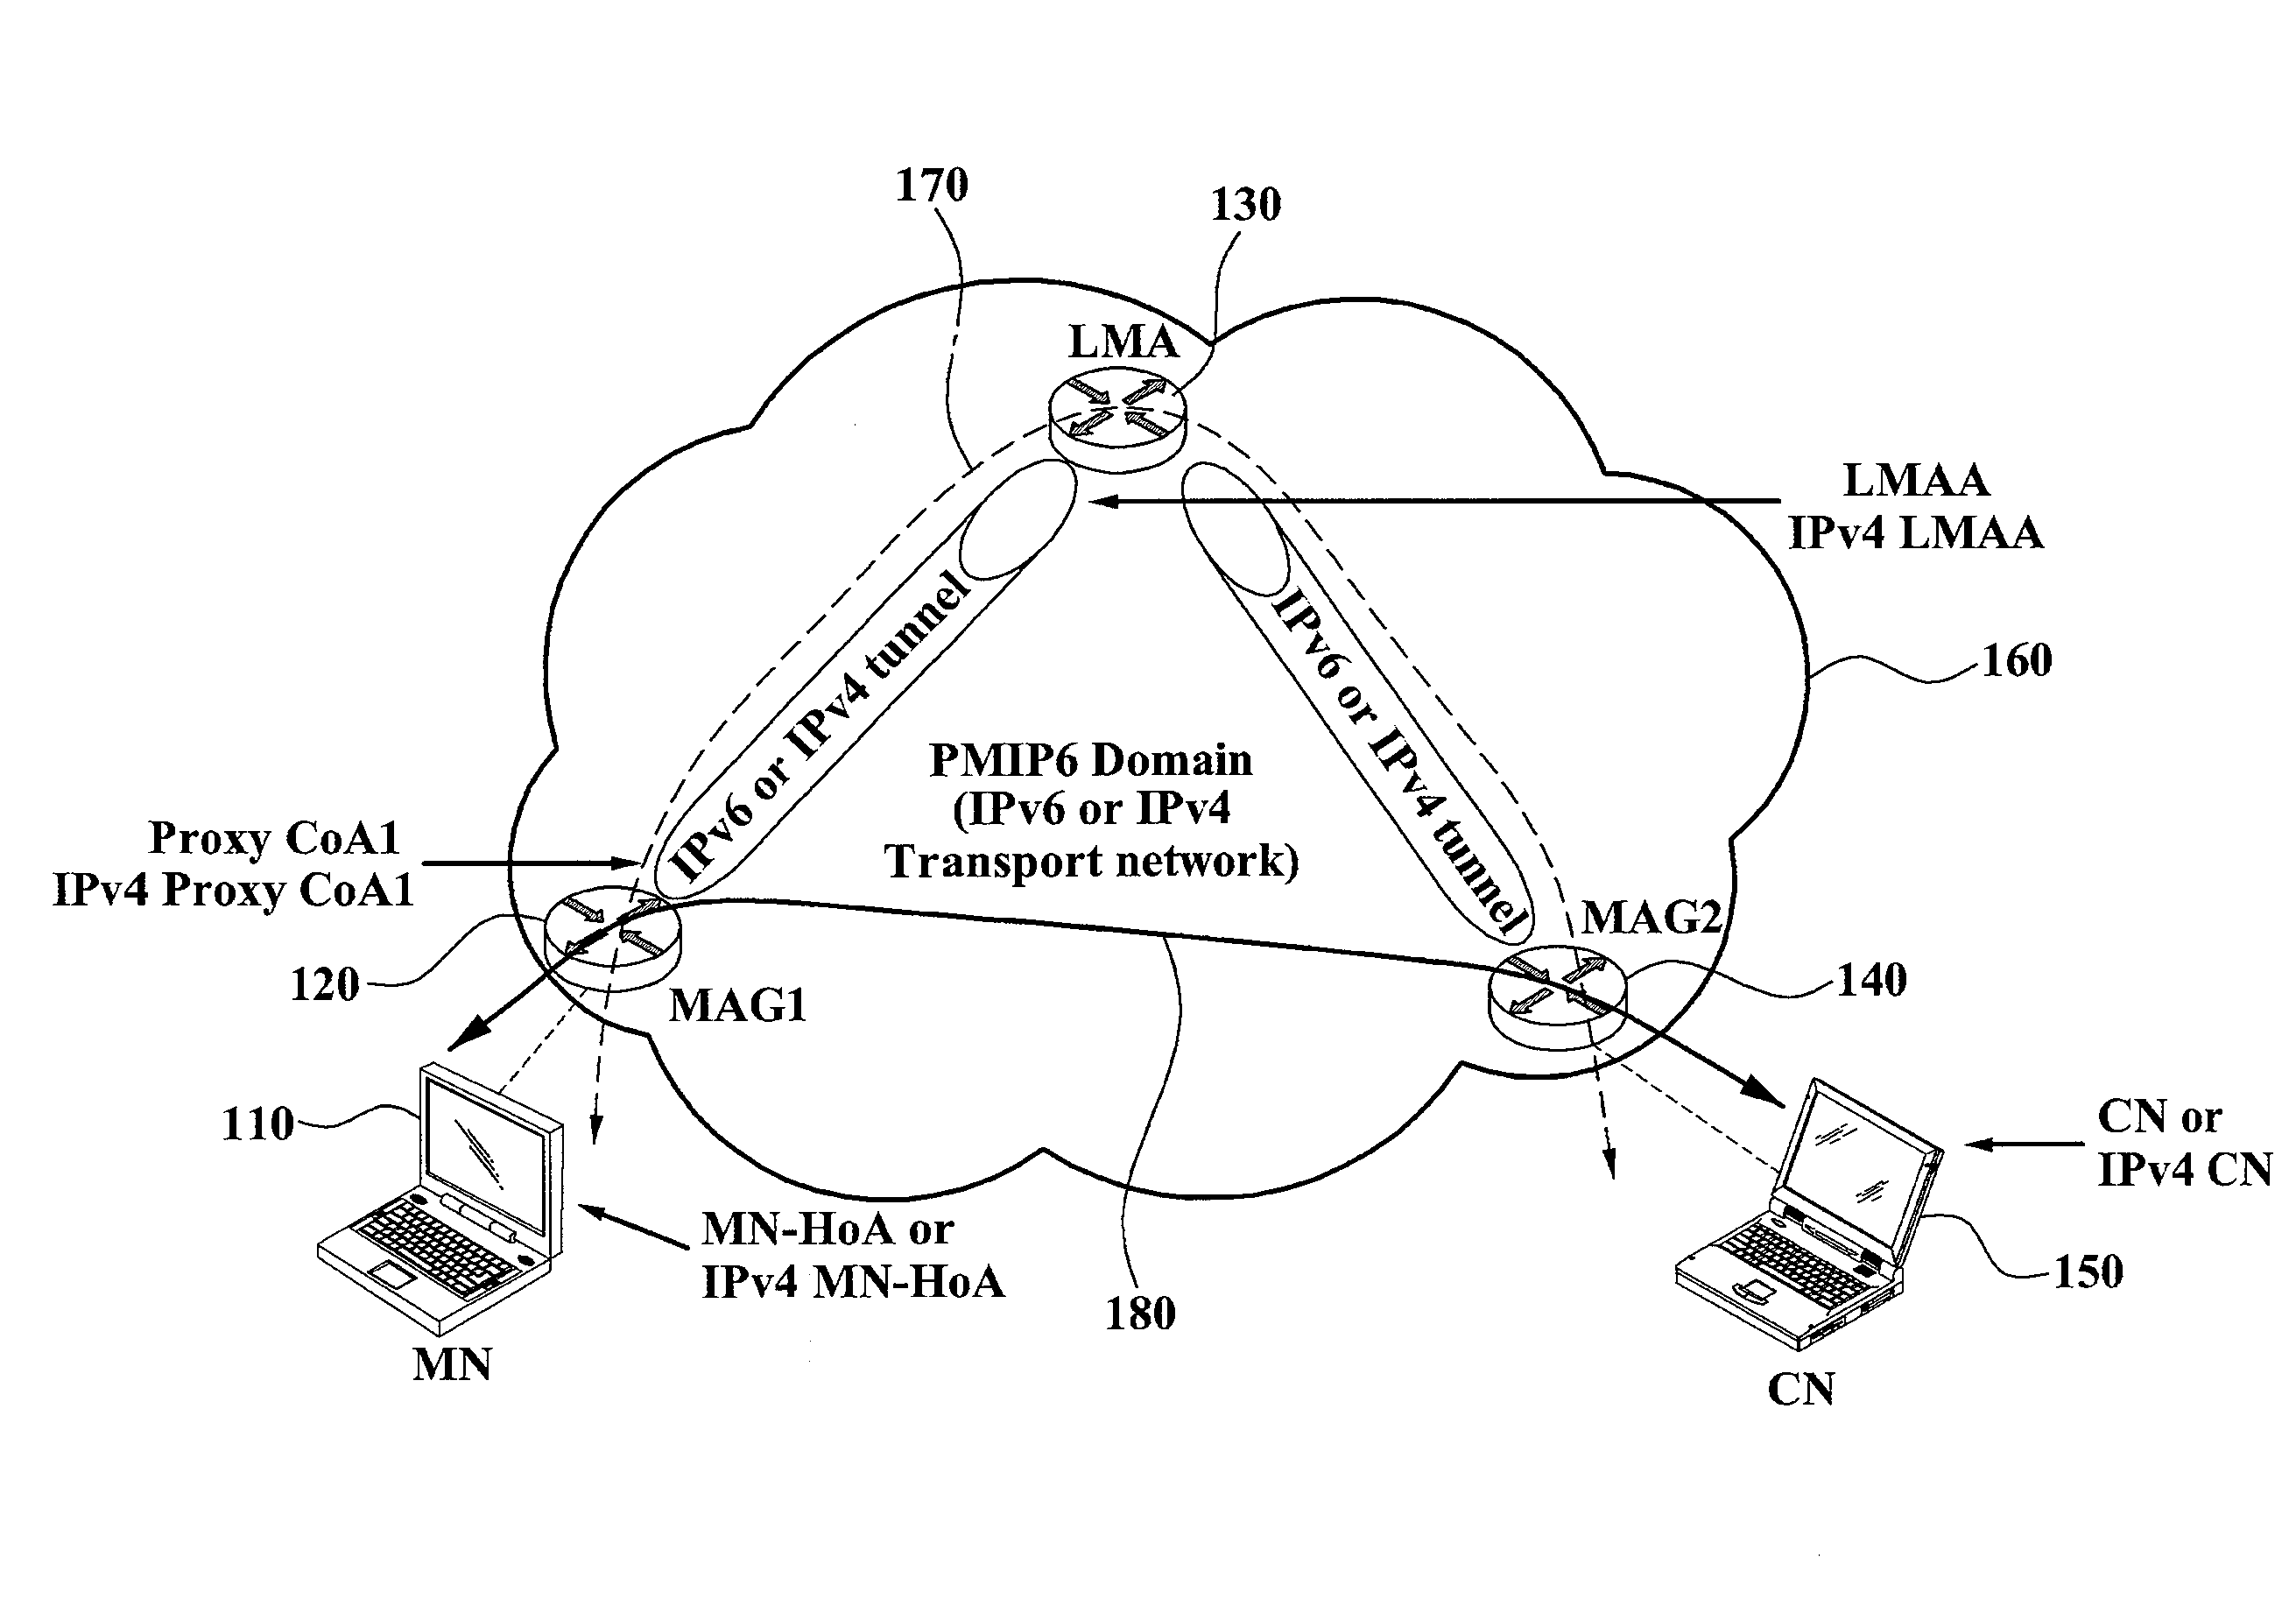 METHOD AND SYSTEM FOR OPTIMIZING ROUTING BETWEEN NODES IN PROXY MOBILE IPv6 NETWORK